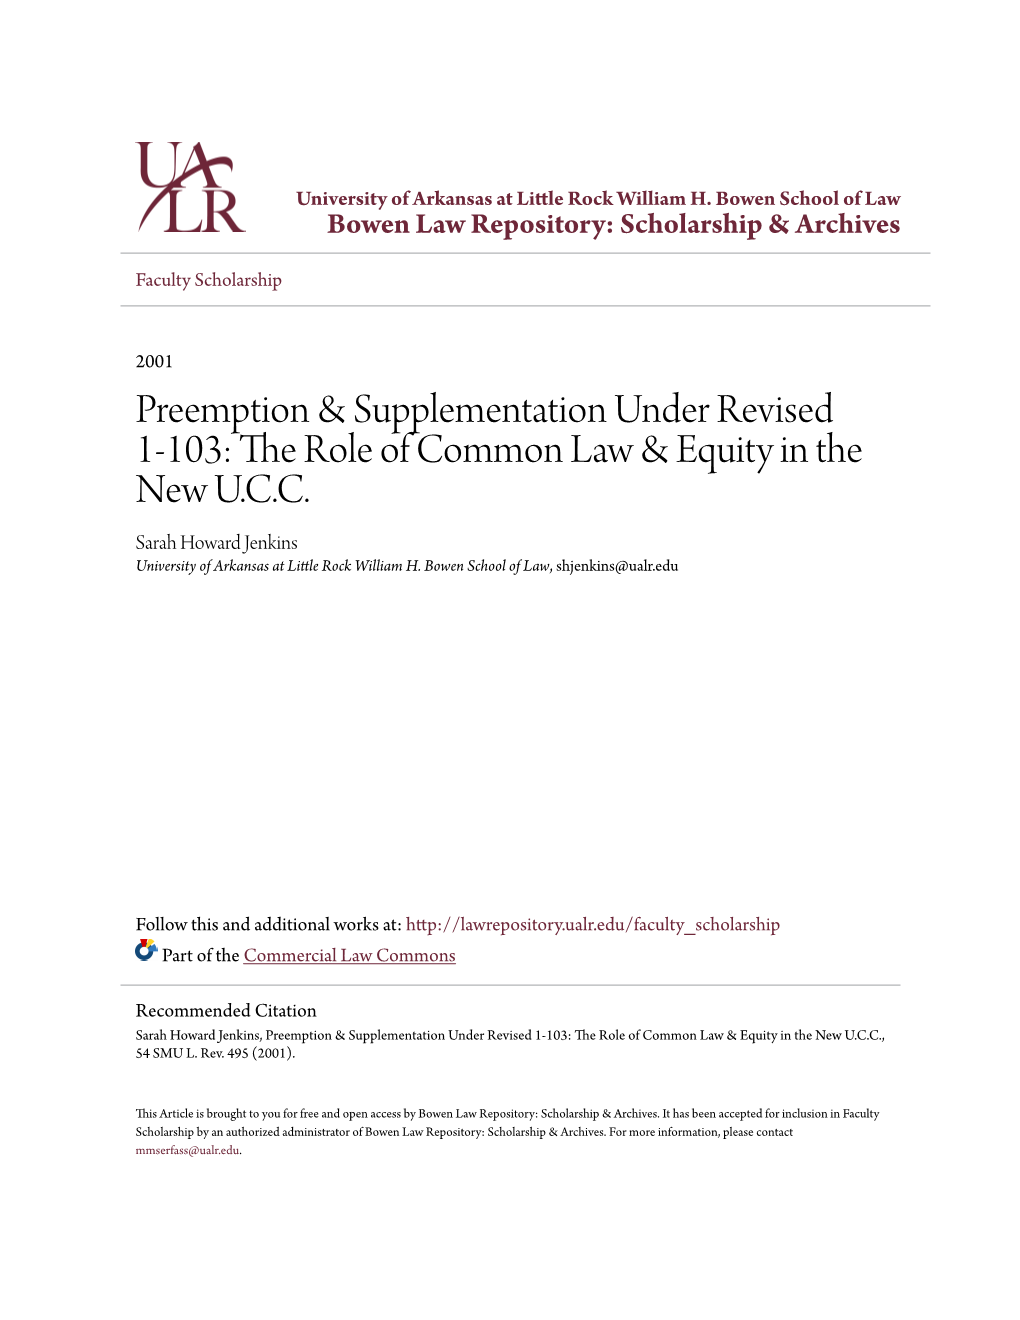 Preemption & Supplementation Under Revised 1-103: the Role Of